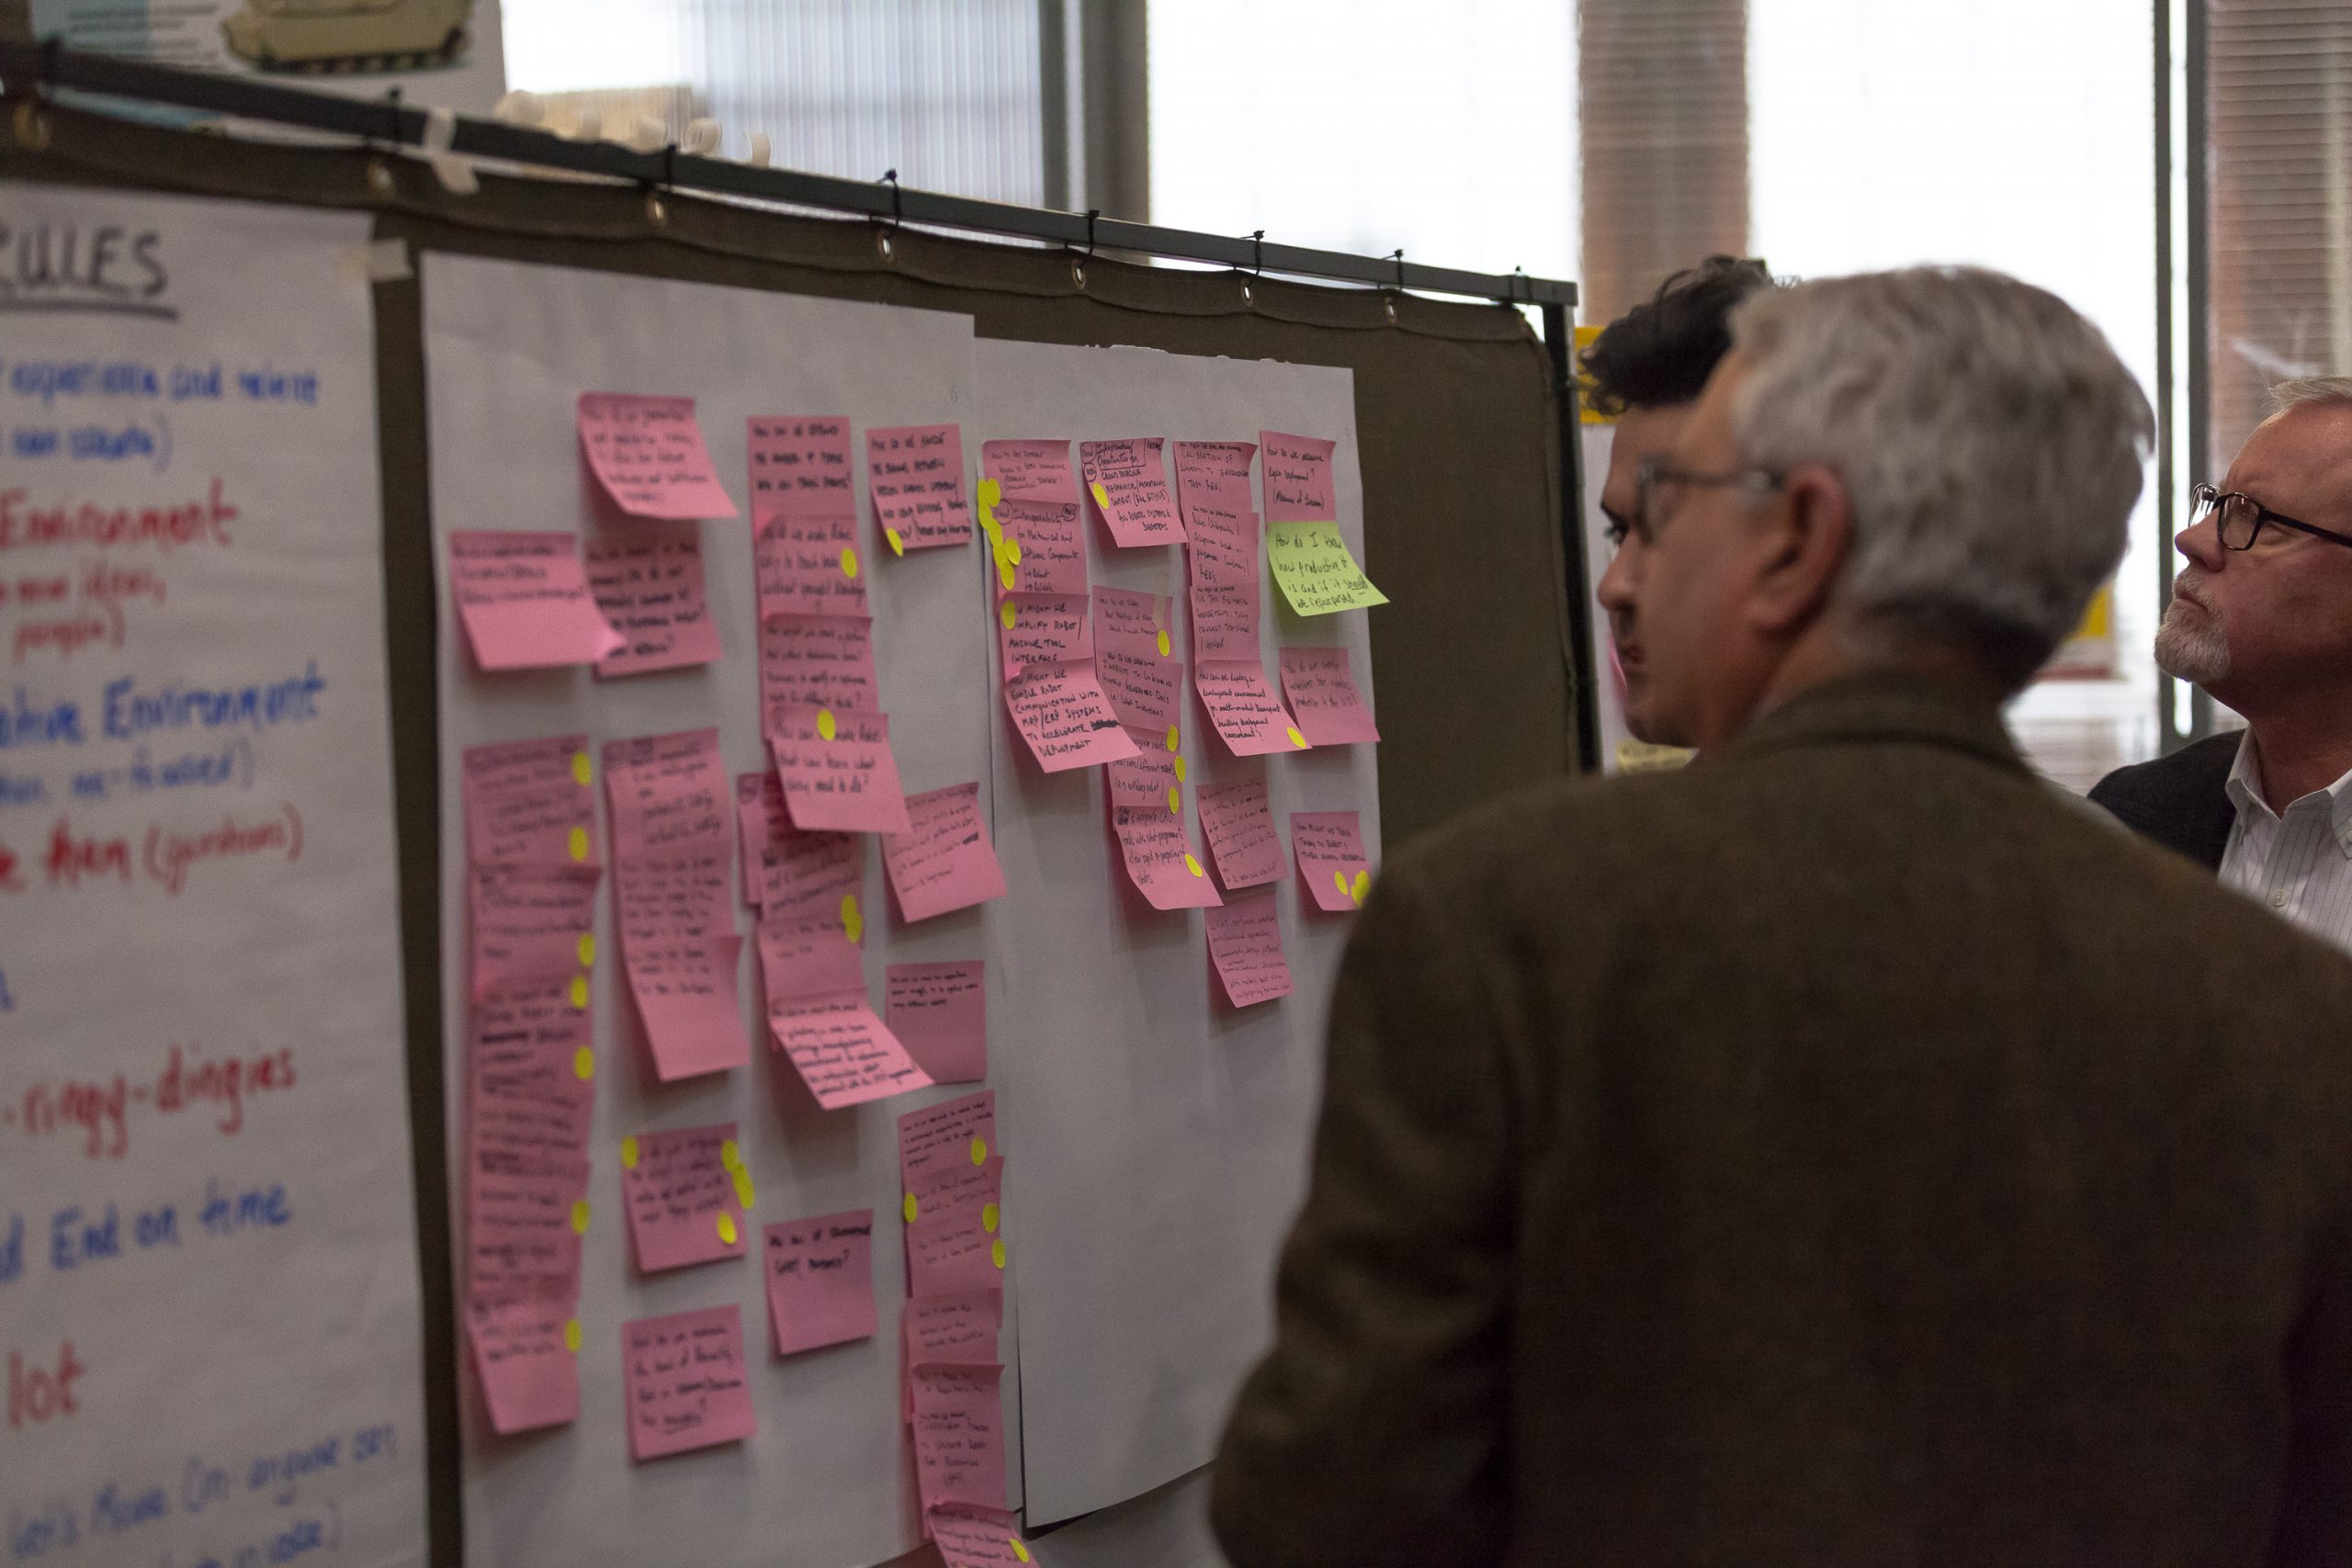 People standing by a board with post-it notes